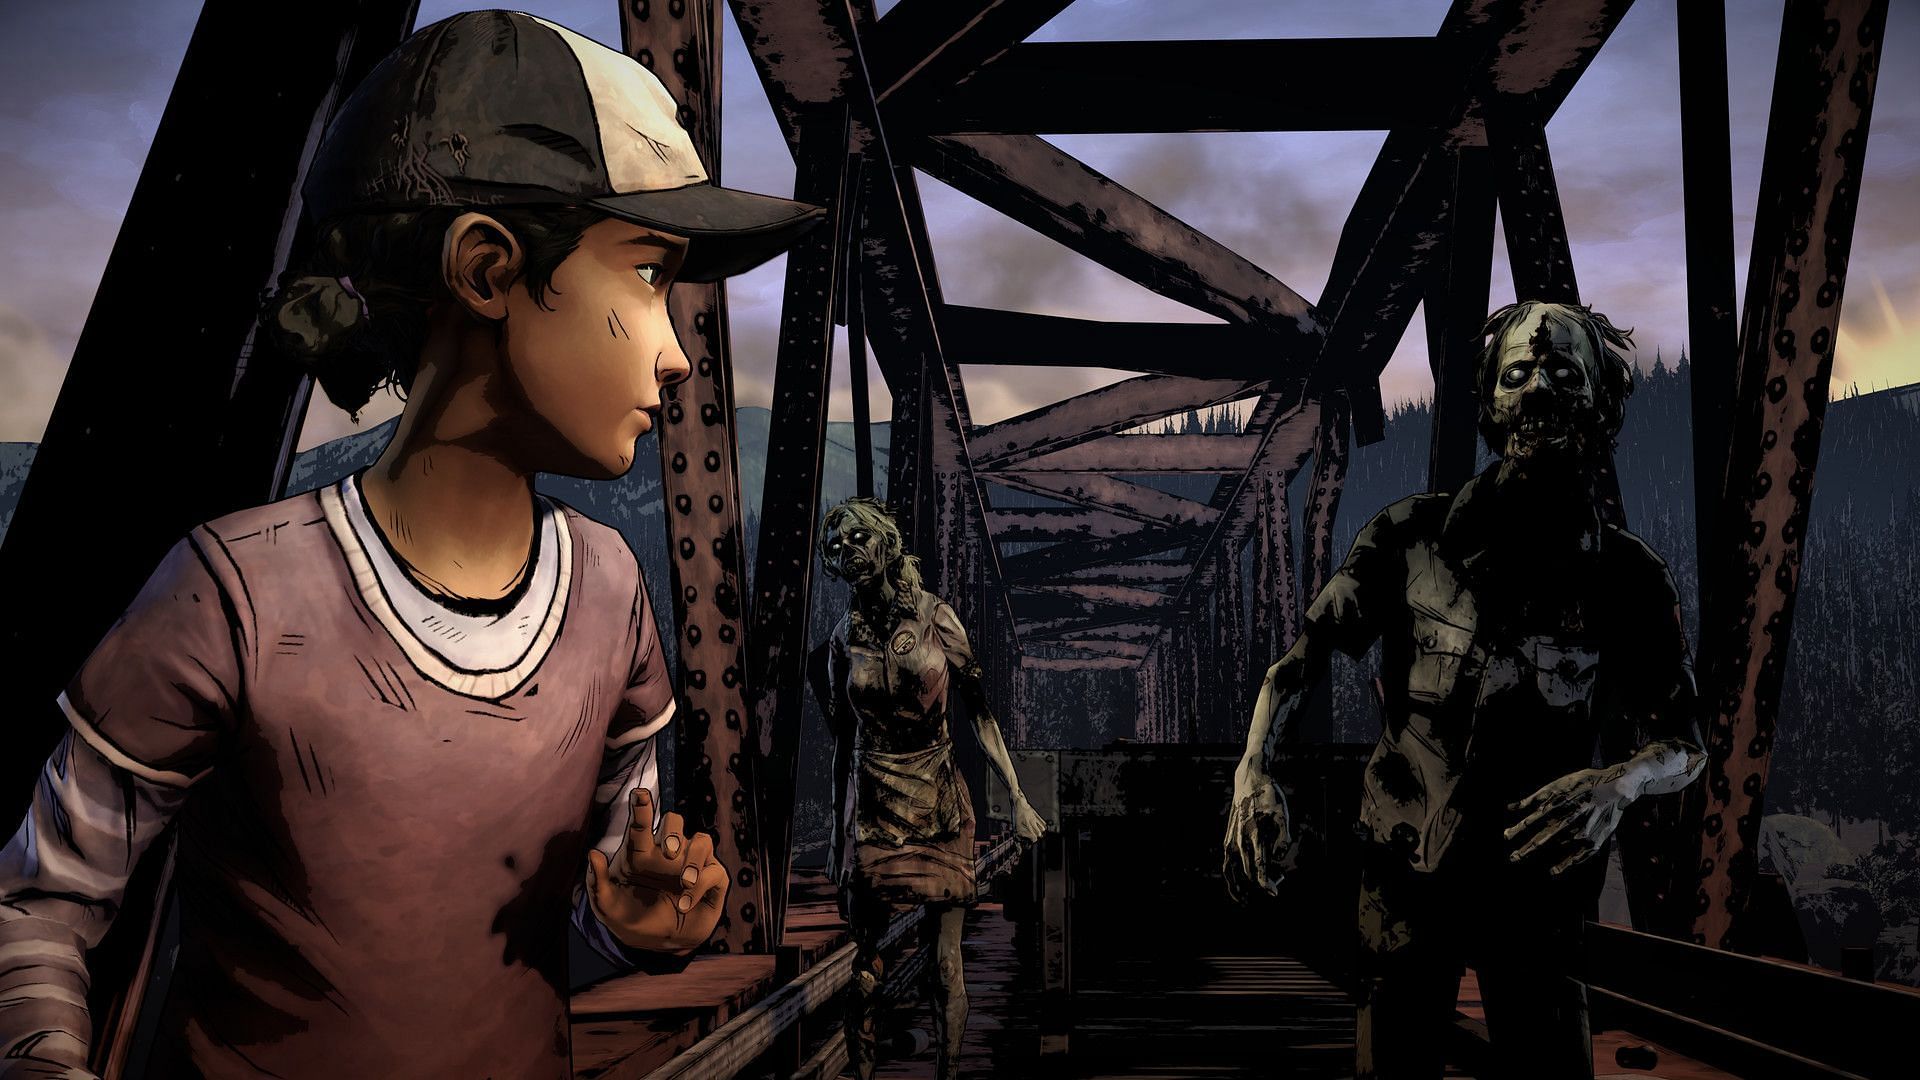 Experience the complete tale of Clementine in The Walking Dead Definitive Edition. (Image via Skybound Games)